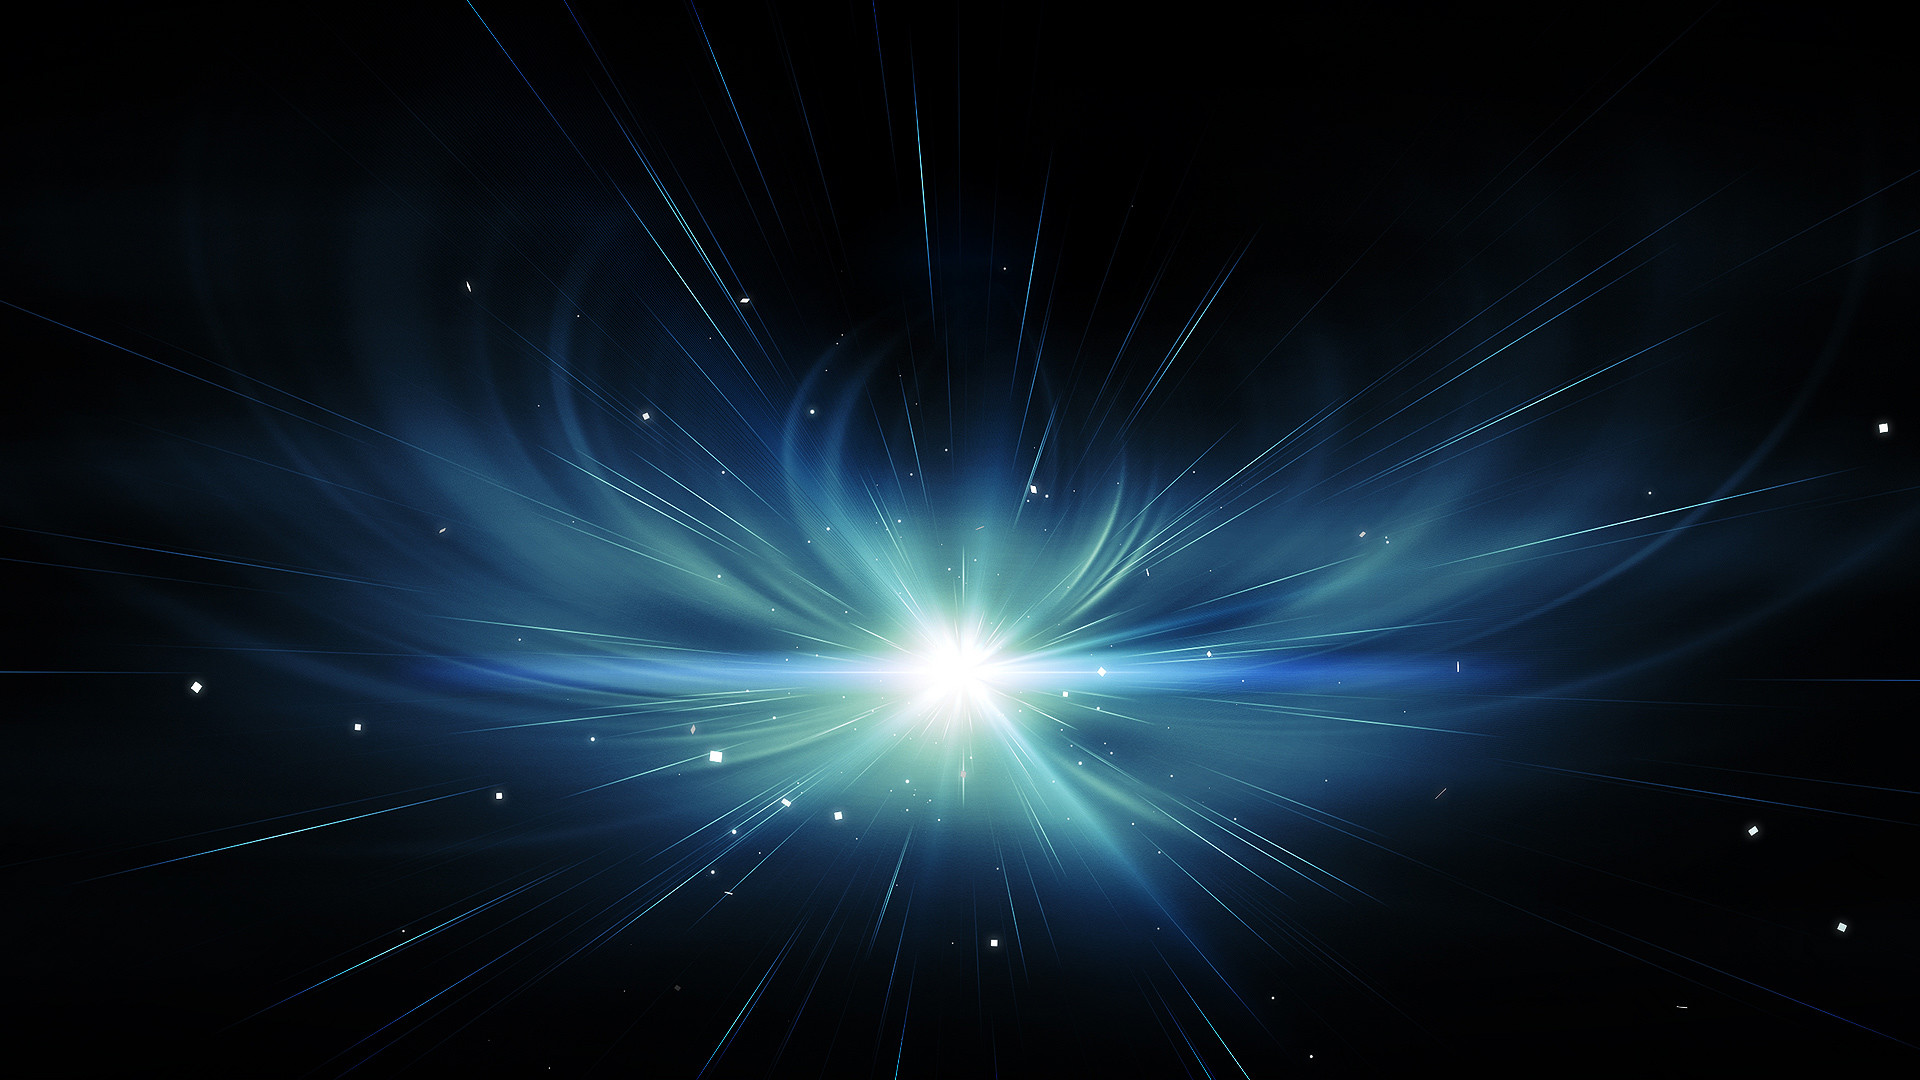 1920x1080 Dark Blue Backgrounds HD download free.